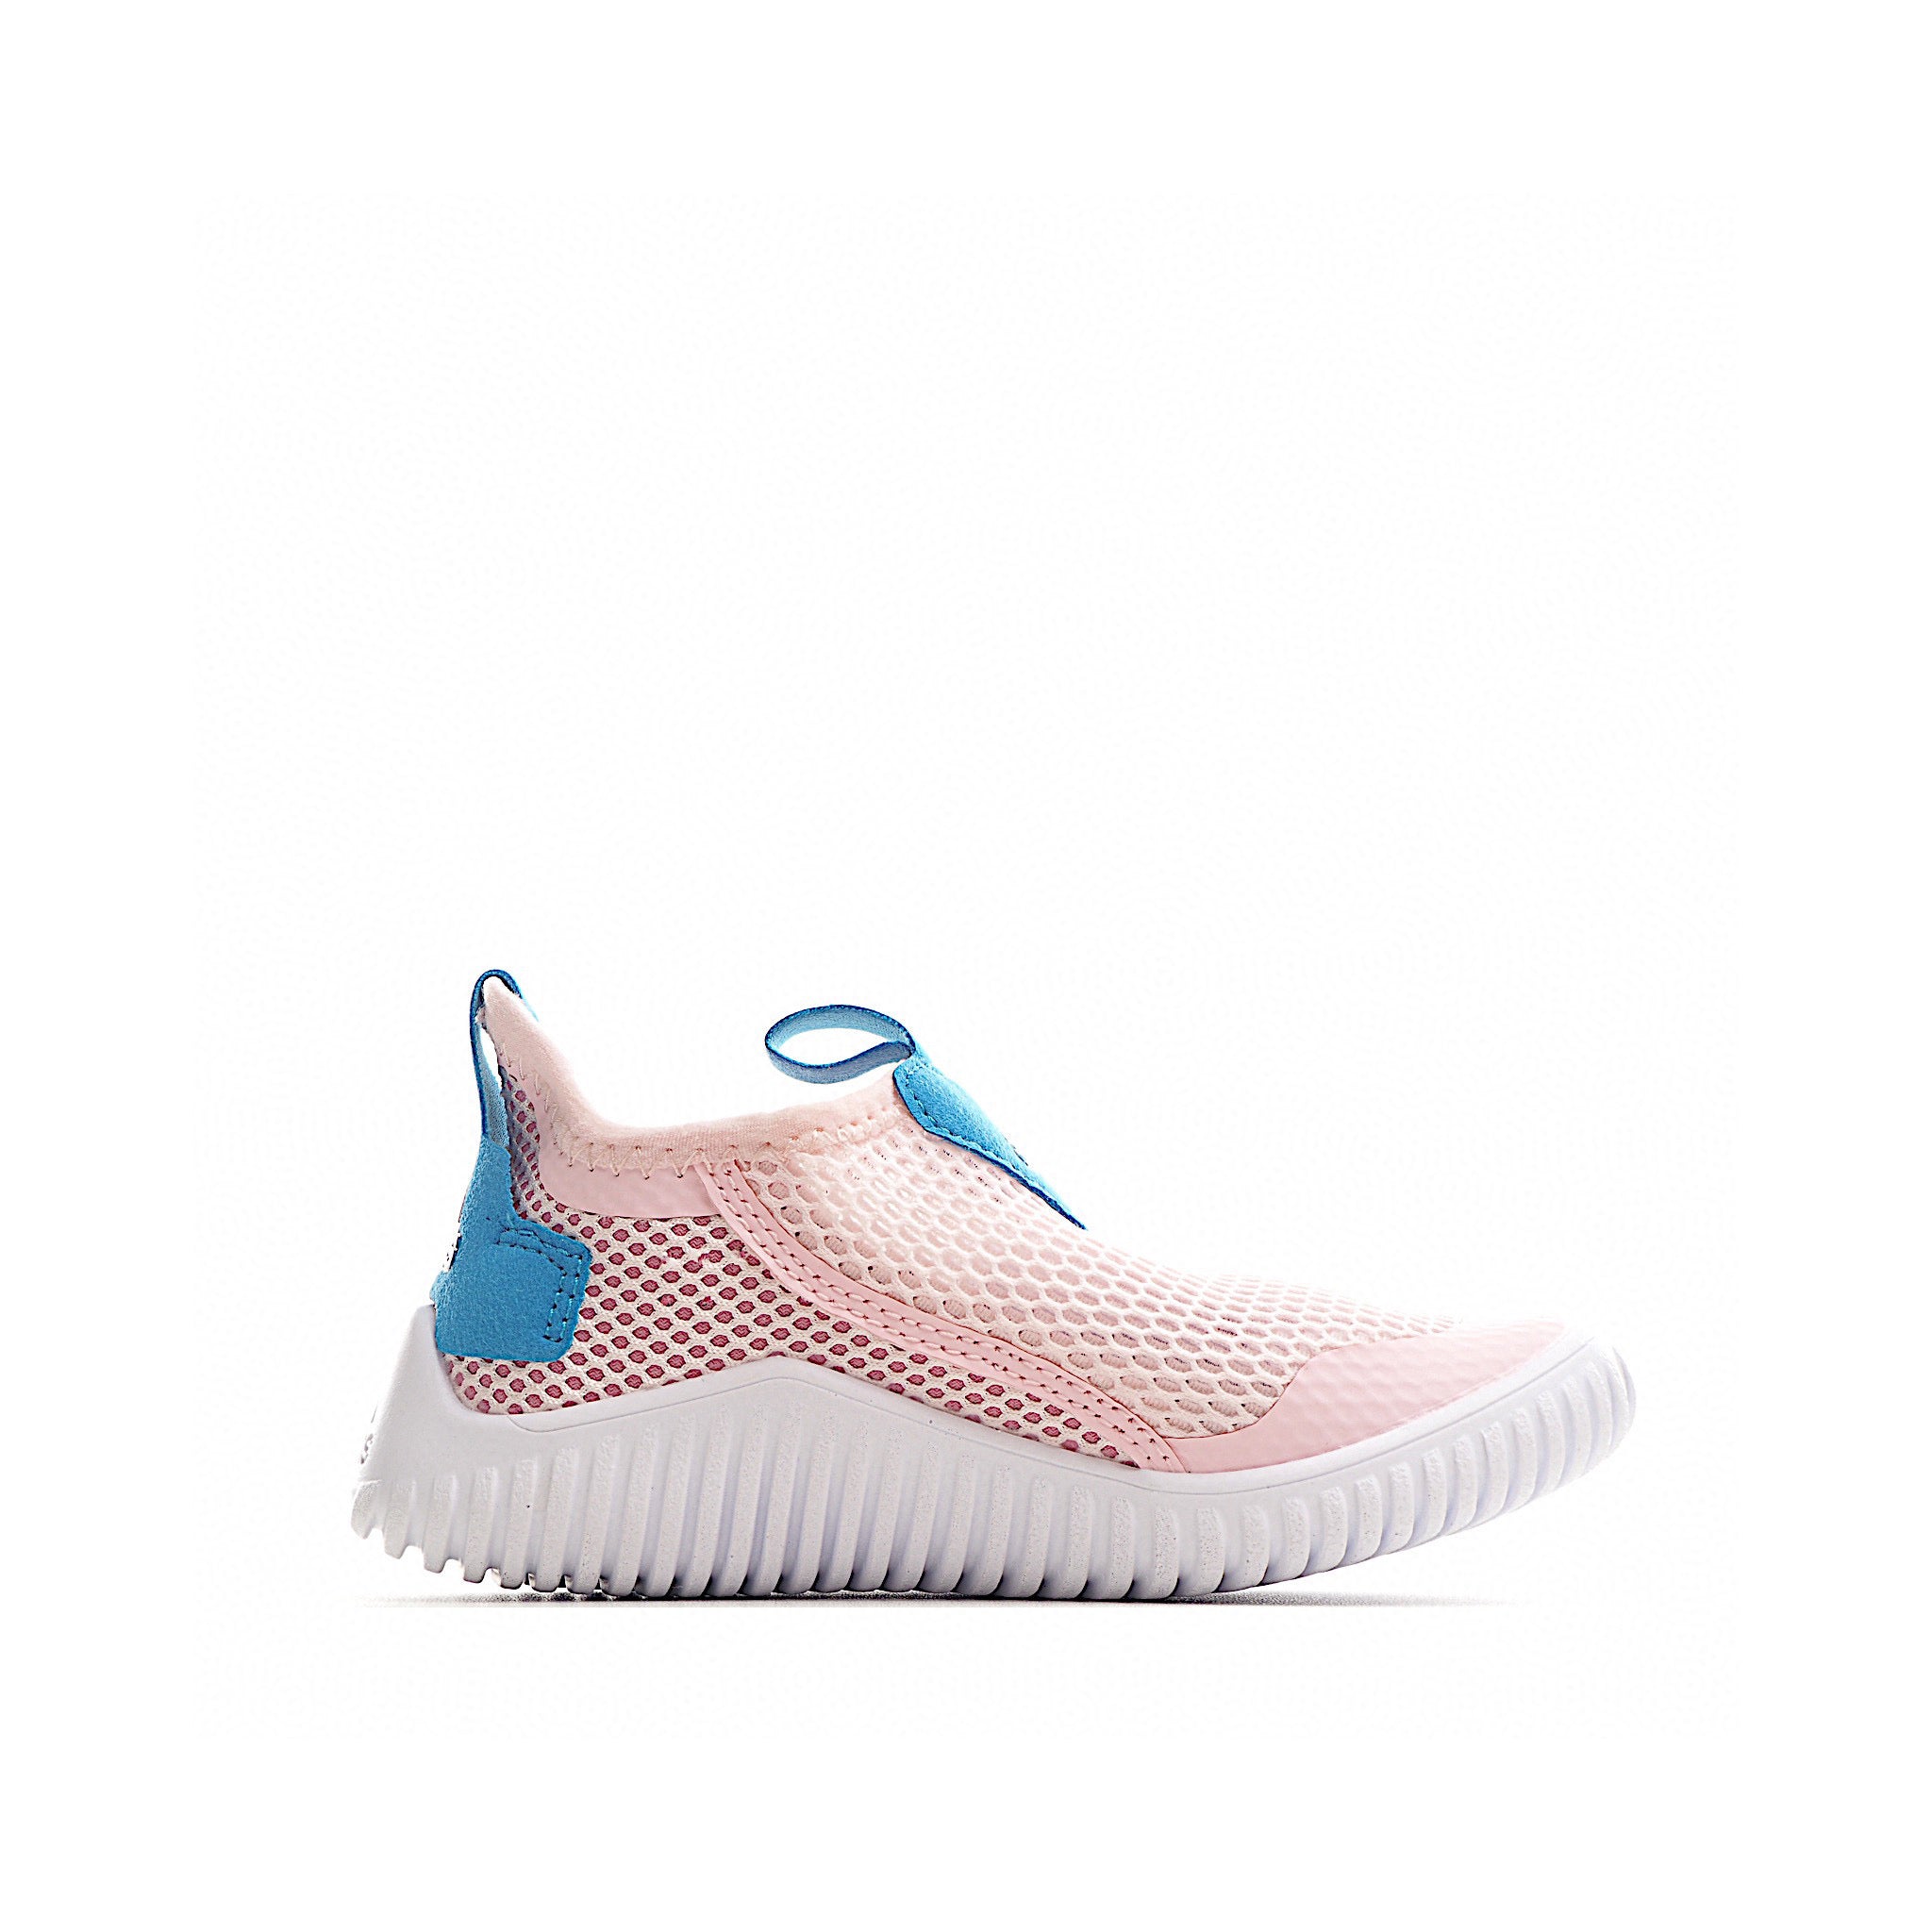 Adidas pink/blue shoes